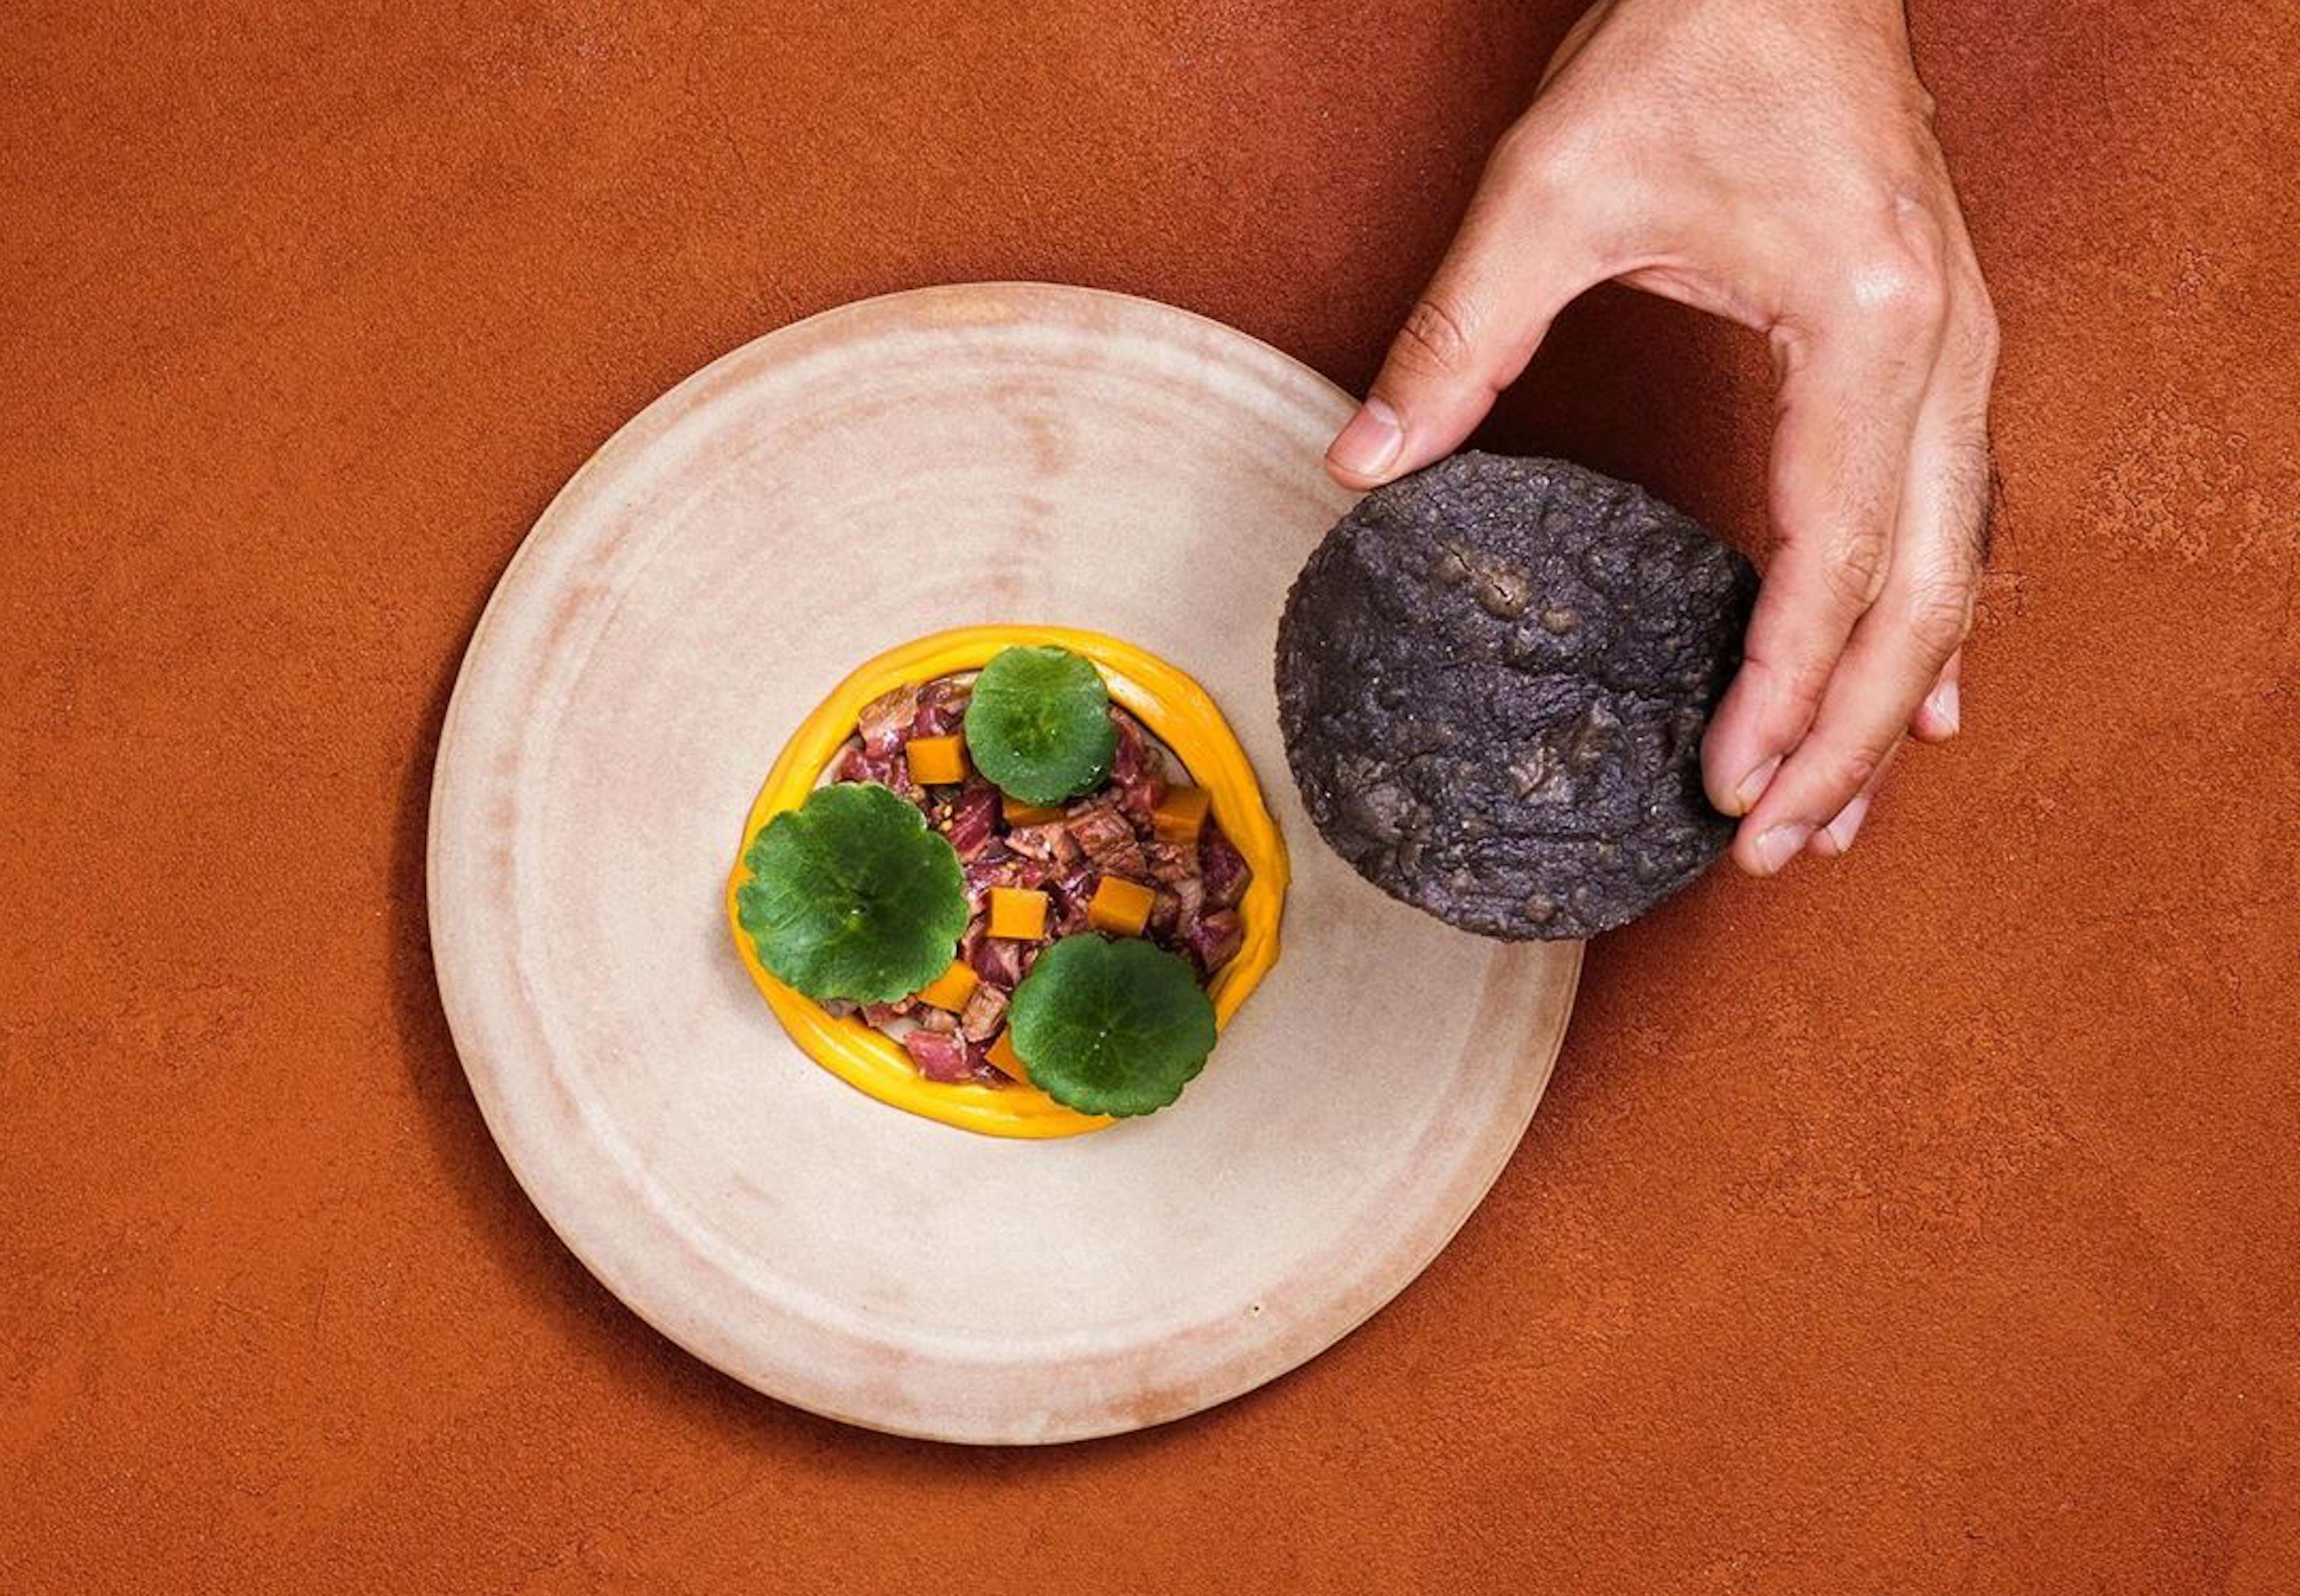 London’s biggest and best new restaurant openings of 2020 include Kol by Santiago Lastra, which serves Mexican dishes like this cured lamb leg tostada with fermented gooseberries and guajillo chilli